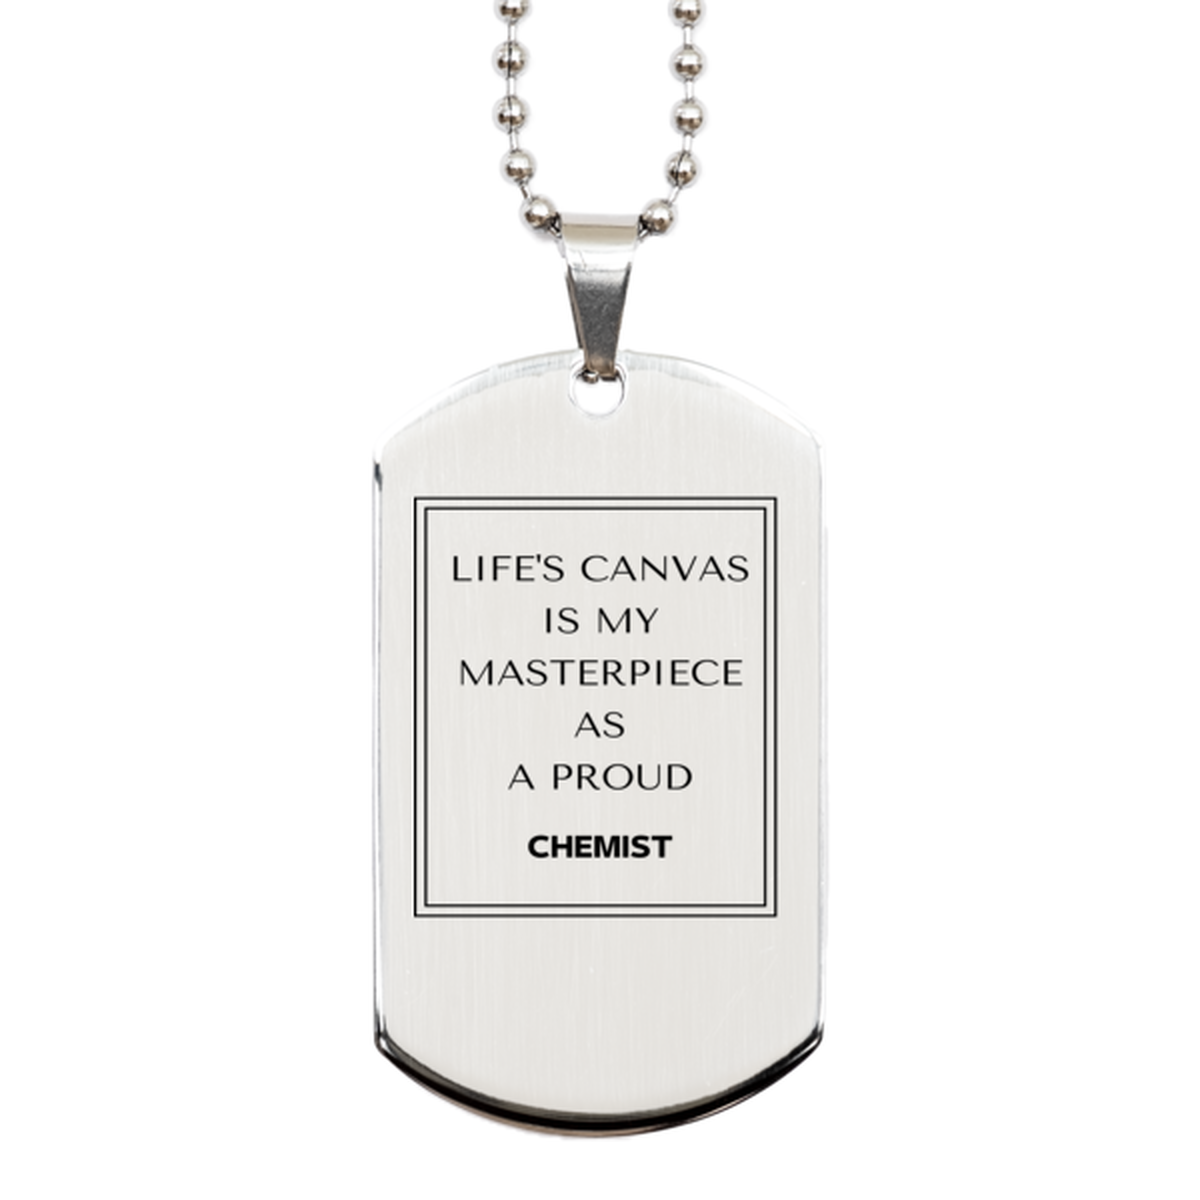 Proud Chemist Gifts, Life's canvas is my masterpiece, Epic Birthday Christmas Unique Silver Dog Tag For Chemist, Coworkers, Men, Women, Friends